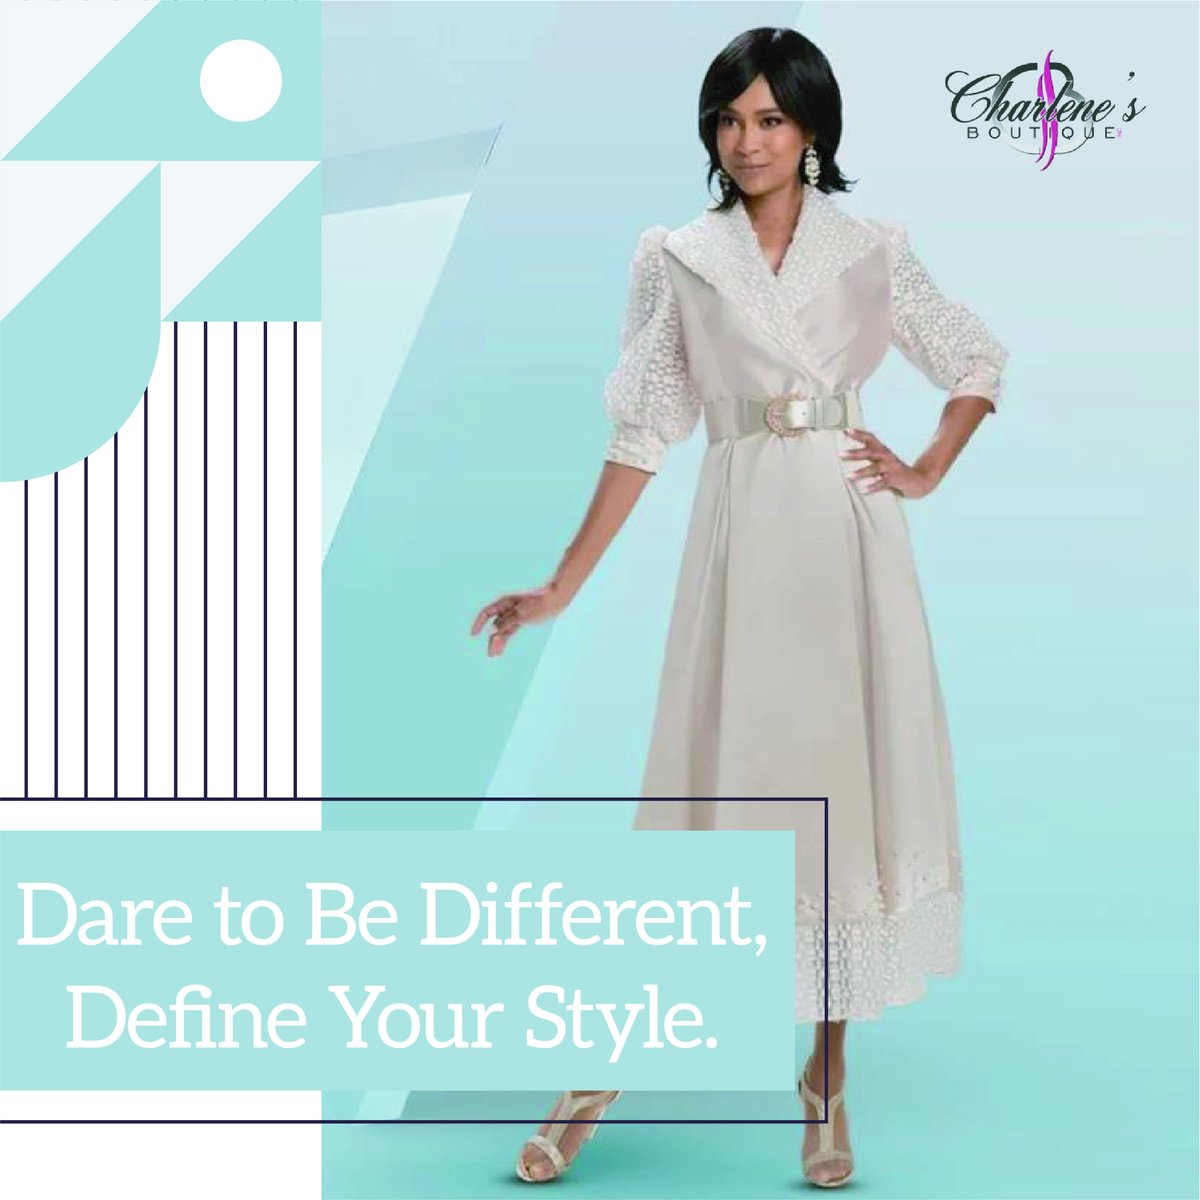 Individuality is celebrated in fashion, and you are encouraged to embrace your true self. #Beyourluve

Place your order now! charlenesboutique.com
.
.
.
#DonnaVinci #churchlooks #clothingapparel #clothing #clothingbrand #instagood #fashionstyle #churchwear #churchclothe